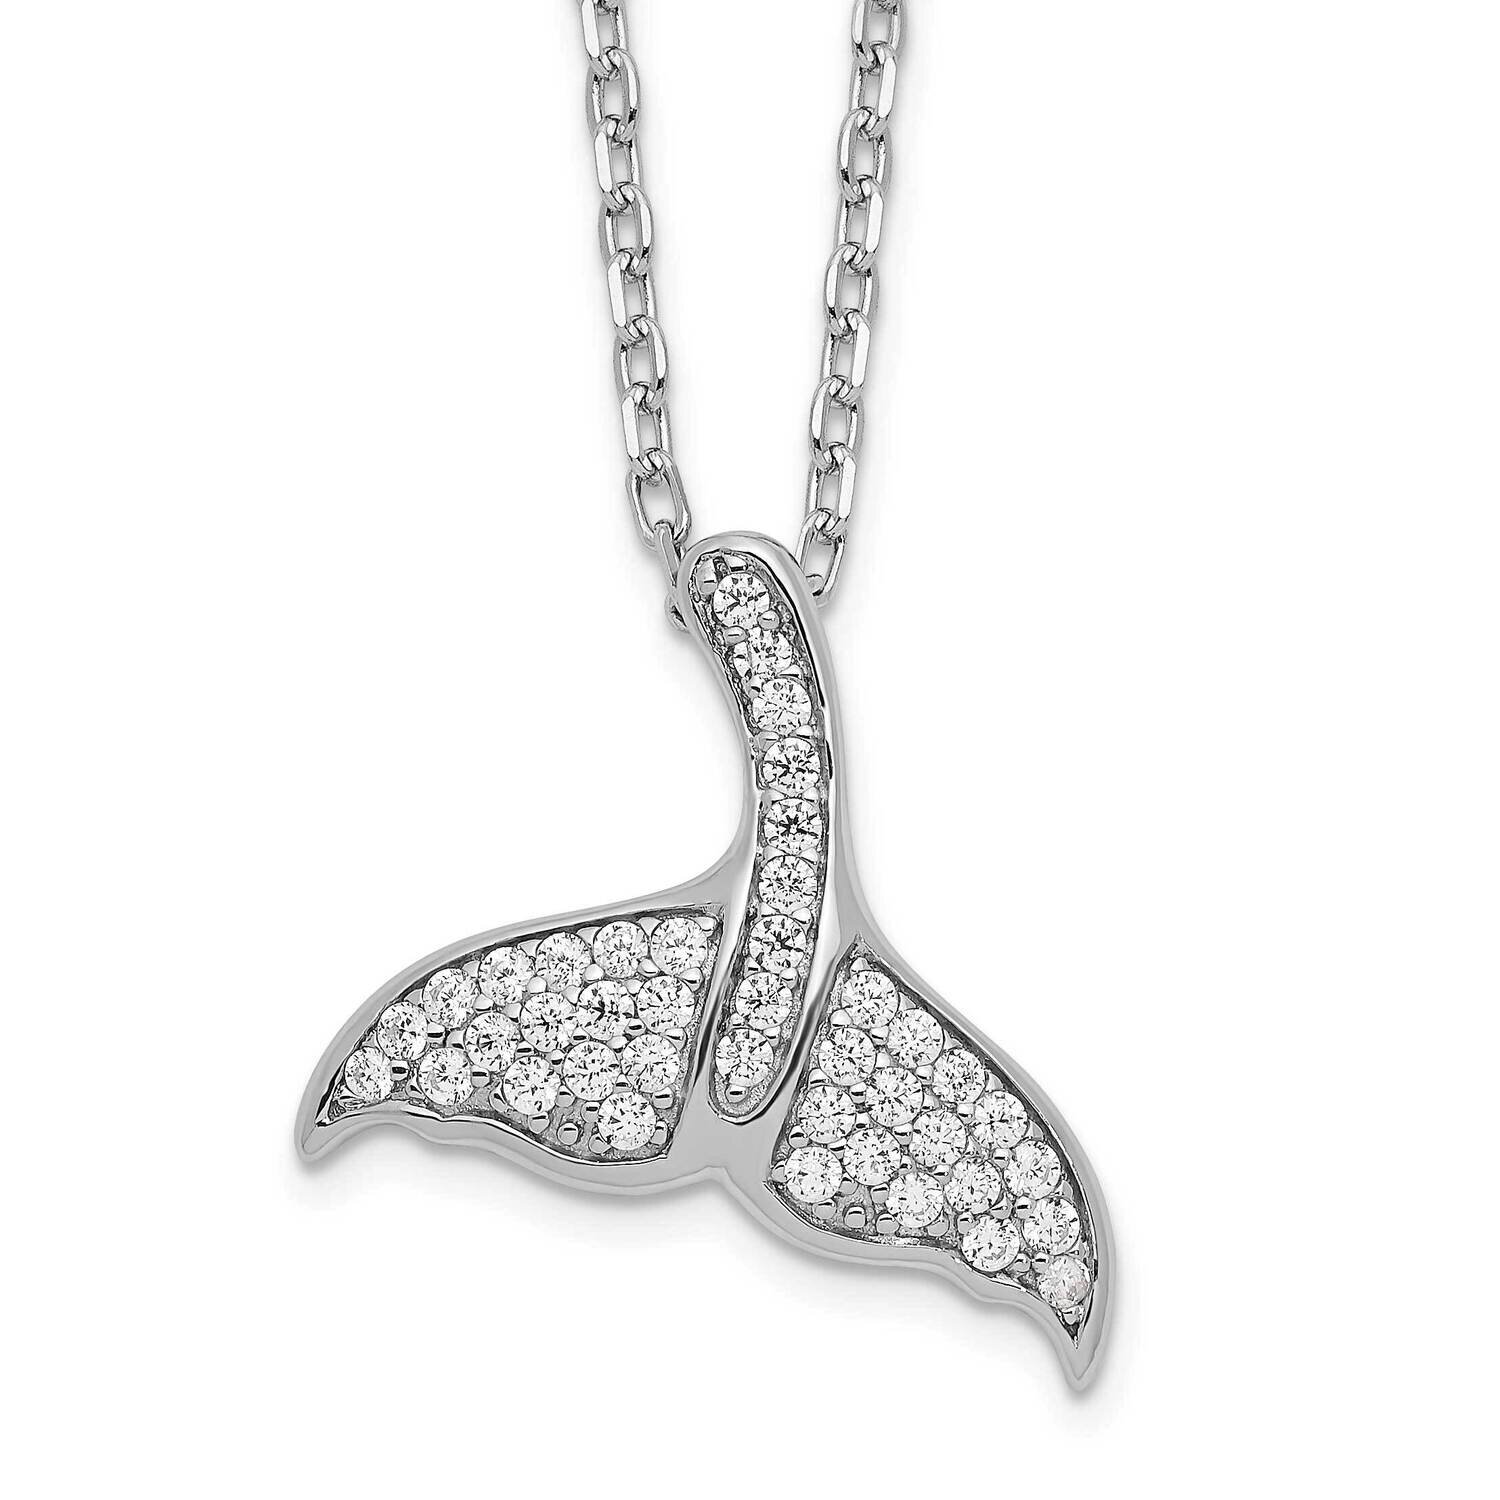 Cheryl M CZ Diamond with 2 Inch Ext. Whale Tail Necklace Sterling Silver Rhodium-plated QCM1542-16